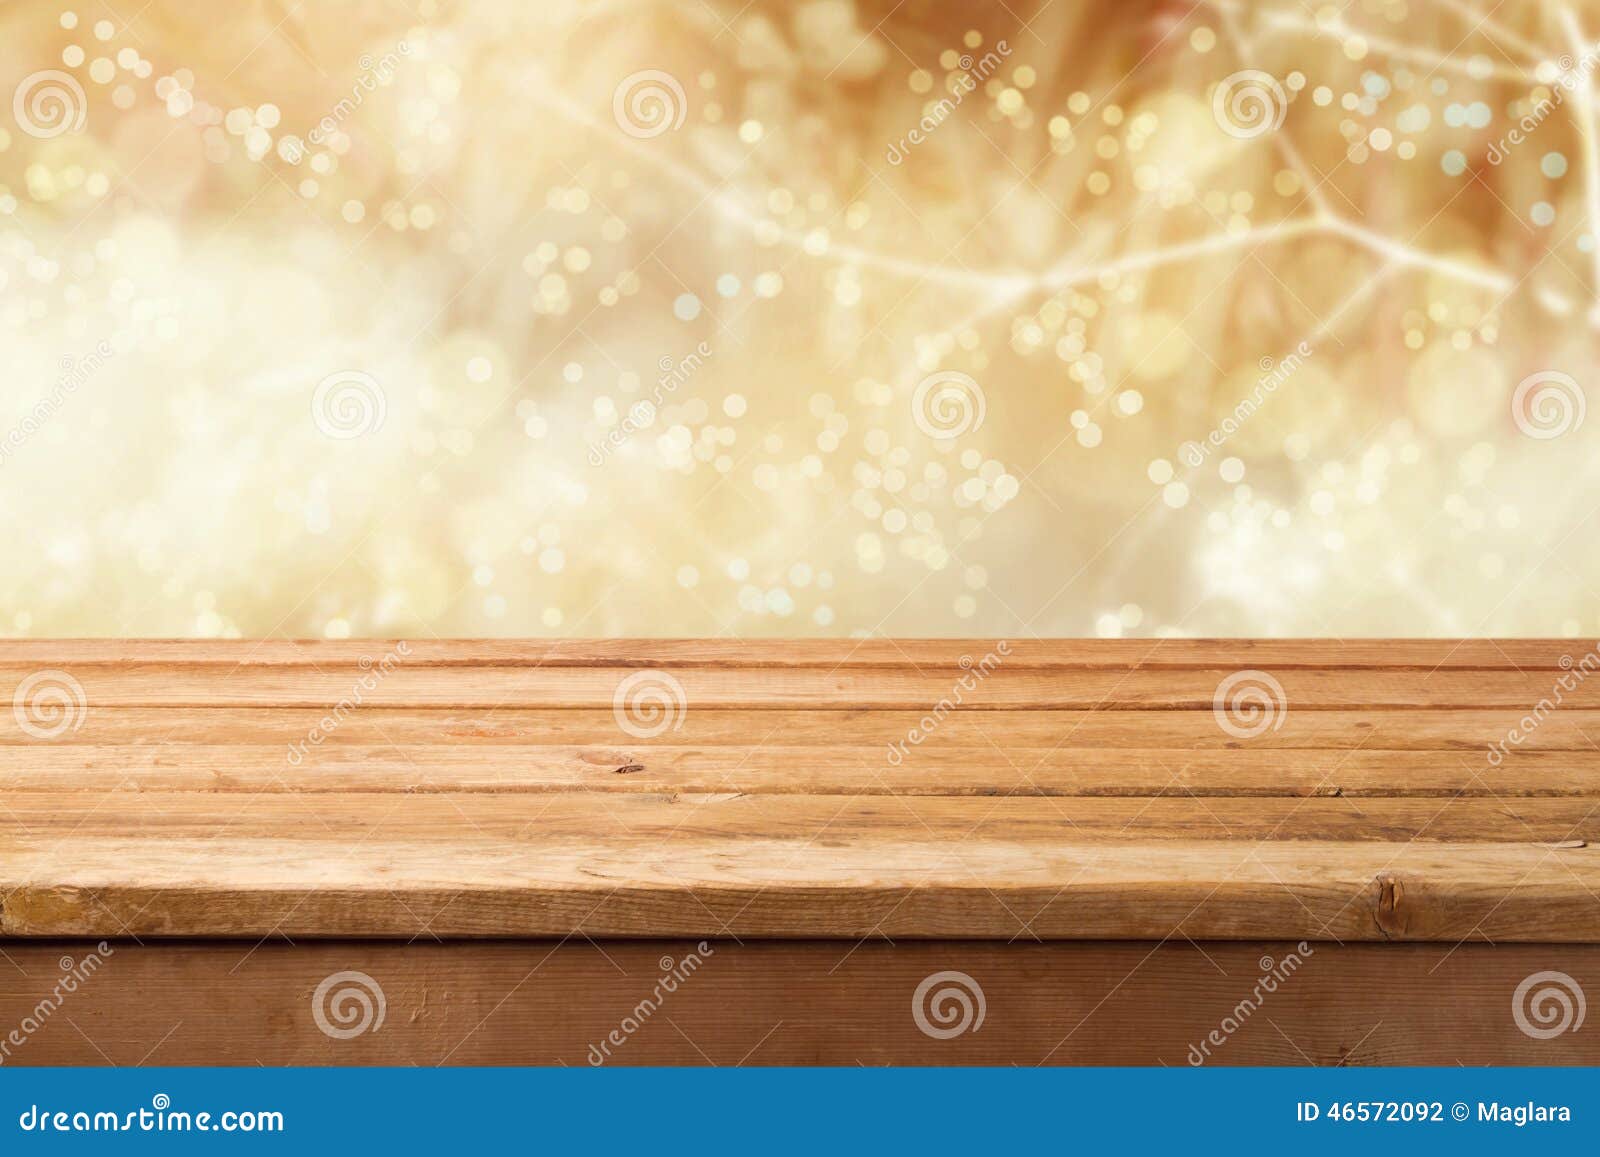 golden bokeh background with empty wooden table for product montage display